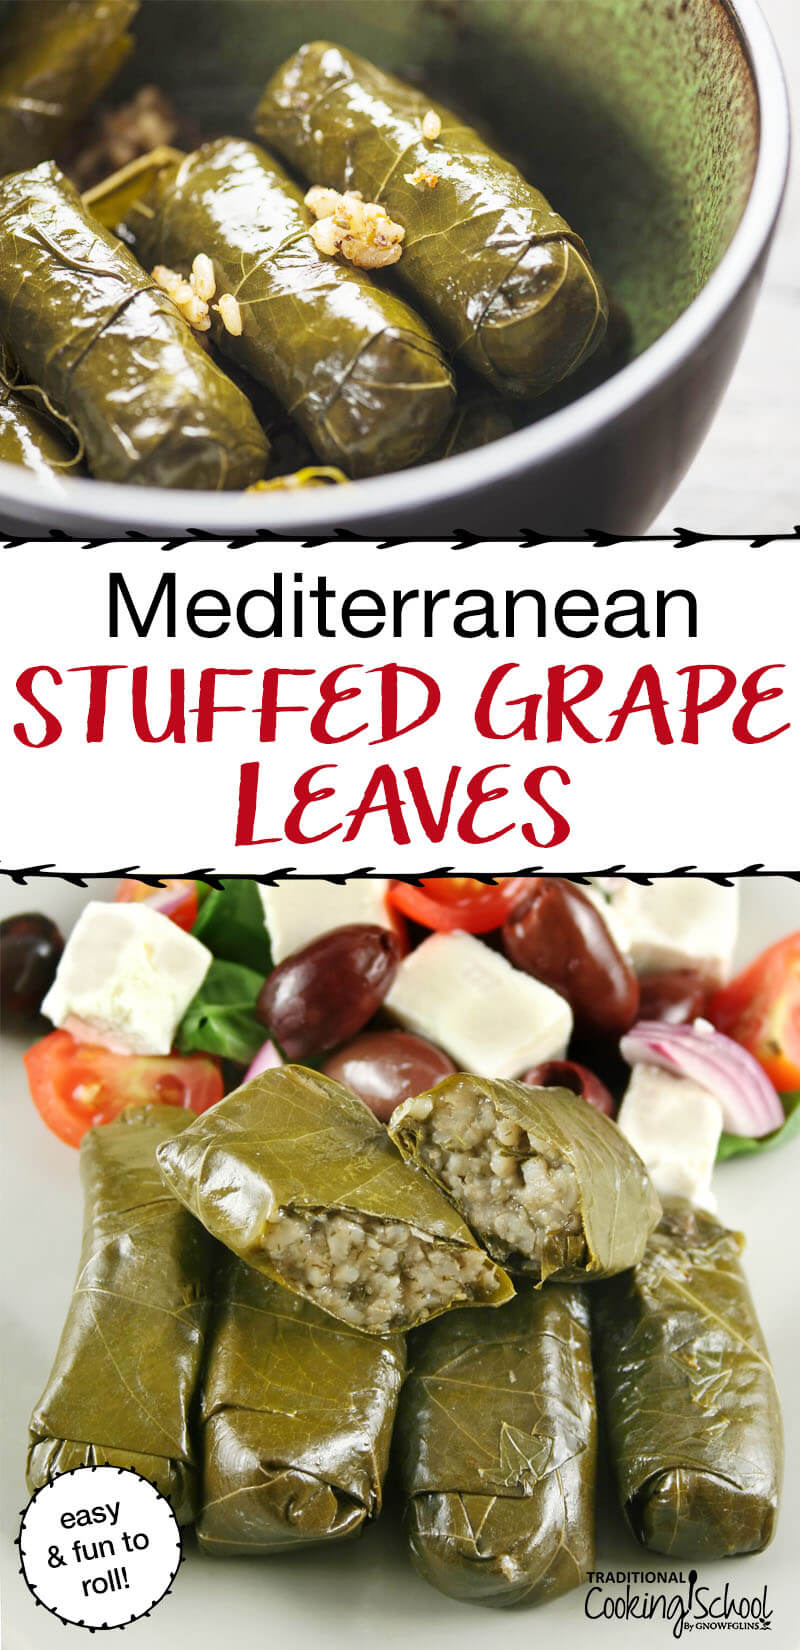 Mediterranean Stuffed Grape Leaves {Dolmas} are one of my all-time favorite foods. When we had them growing up, it was a family affair. Whoever was home loved to get in on the rolling. My mom would lead us in making a huge pot of them, stuffed full with deliciously seasoned meat, rolled in a grape leaf drenched in lemon juice. We would eat off this Greek favorite for days, if they lasted that long! #stuffedgrapeleaves #recipe #mediterranean #greek #stuffed #lamb #beef #tradcookschool